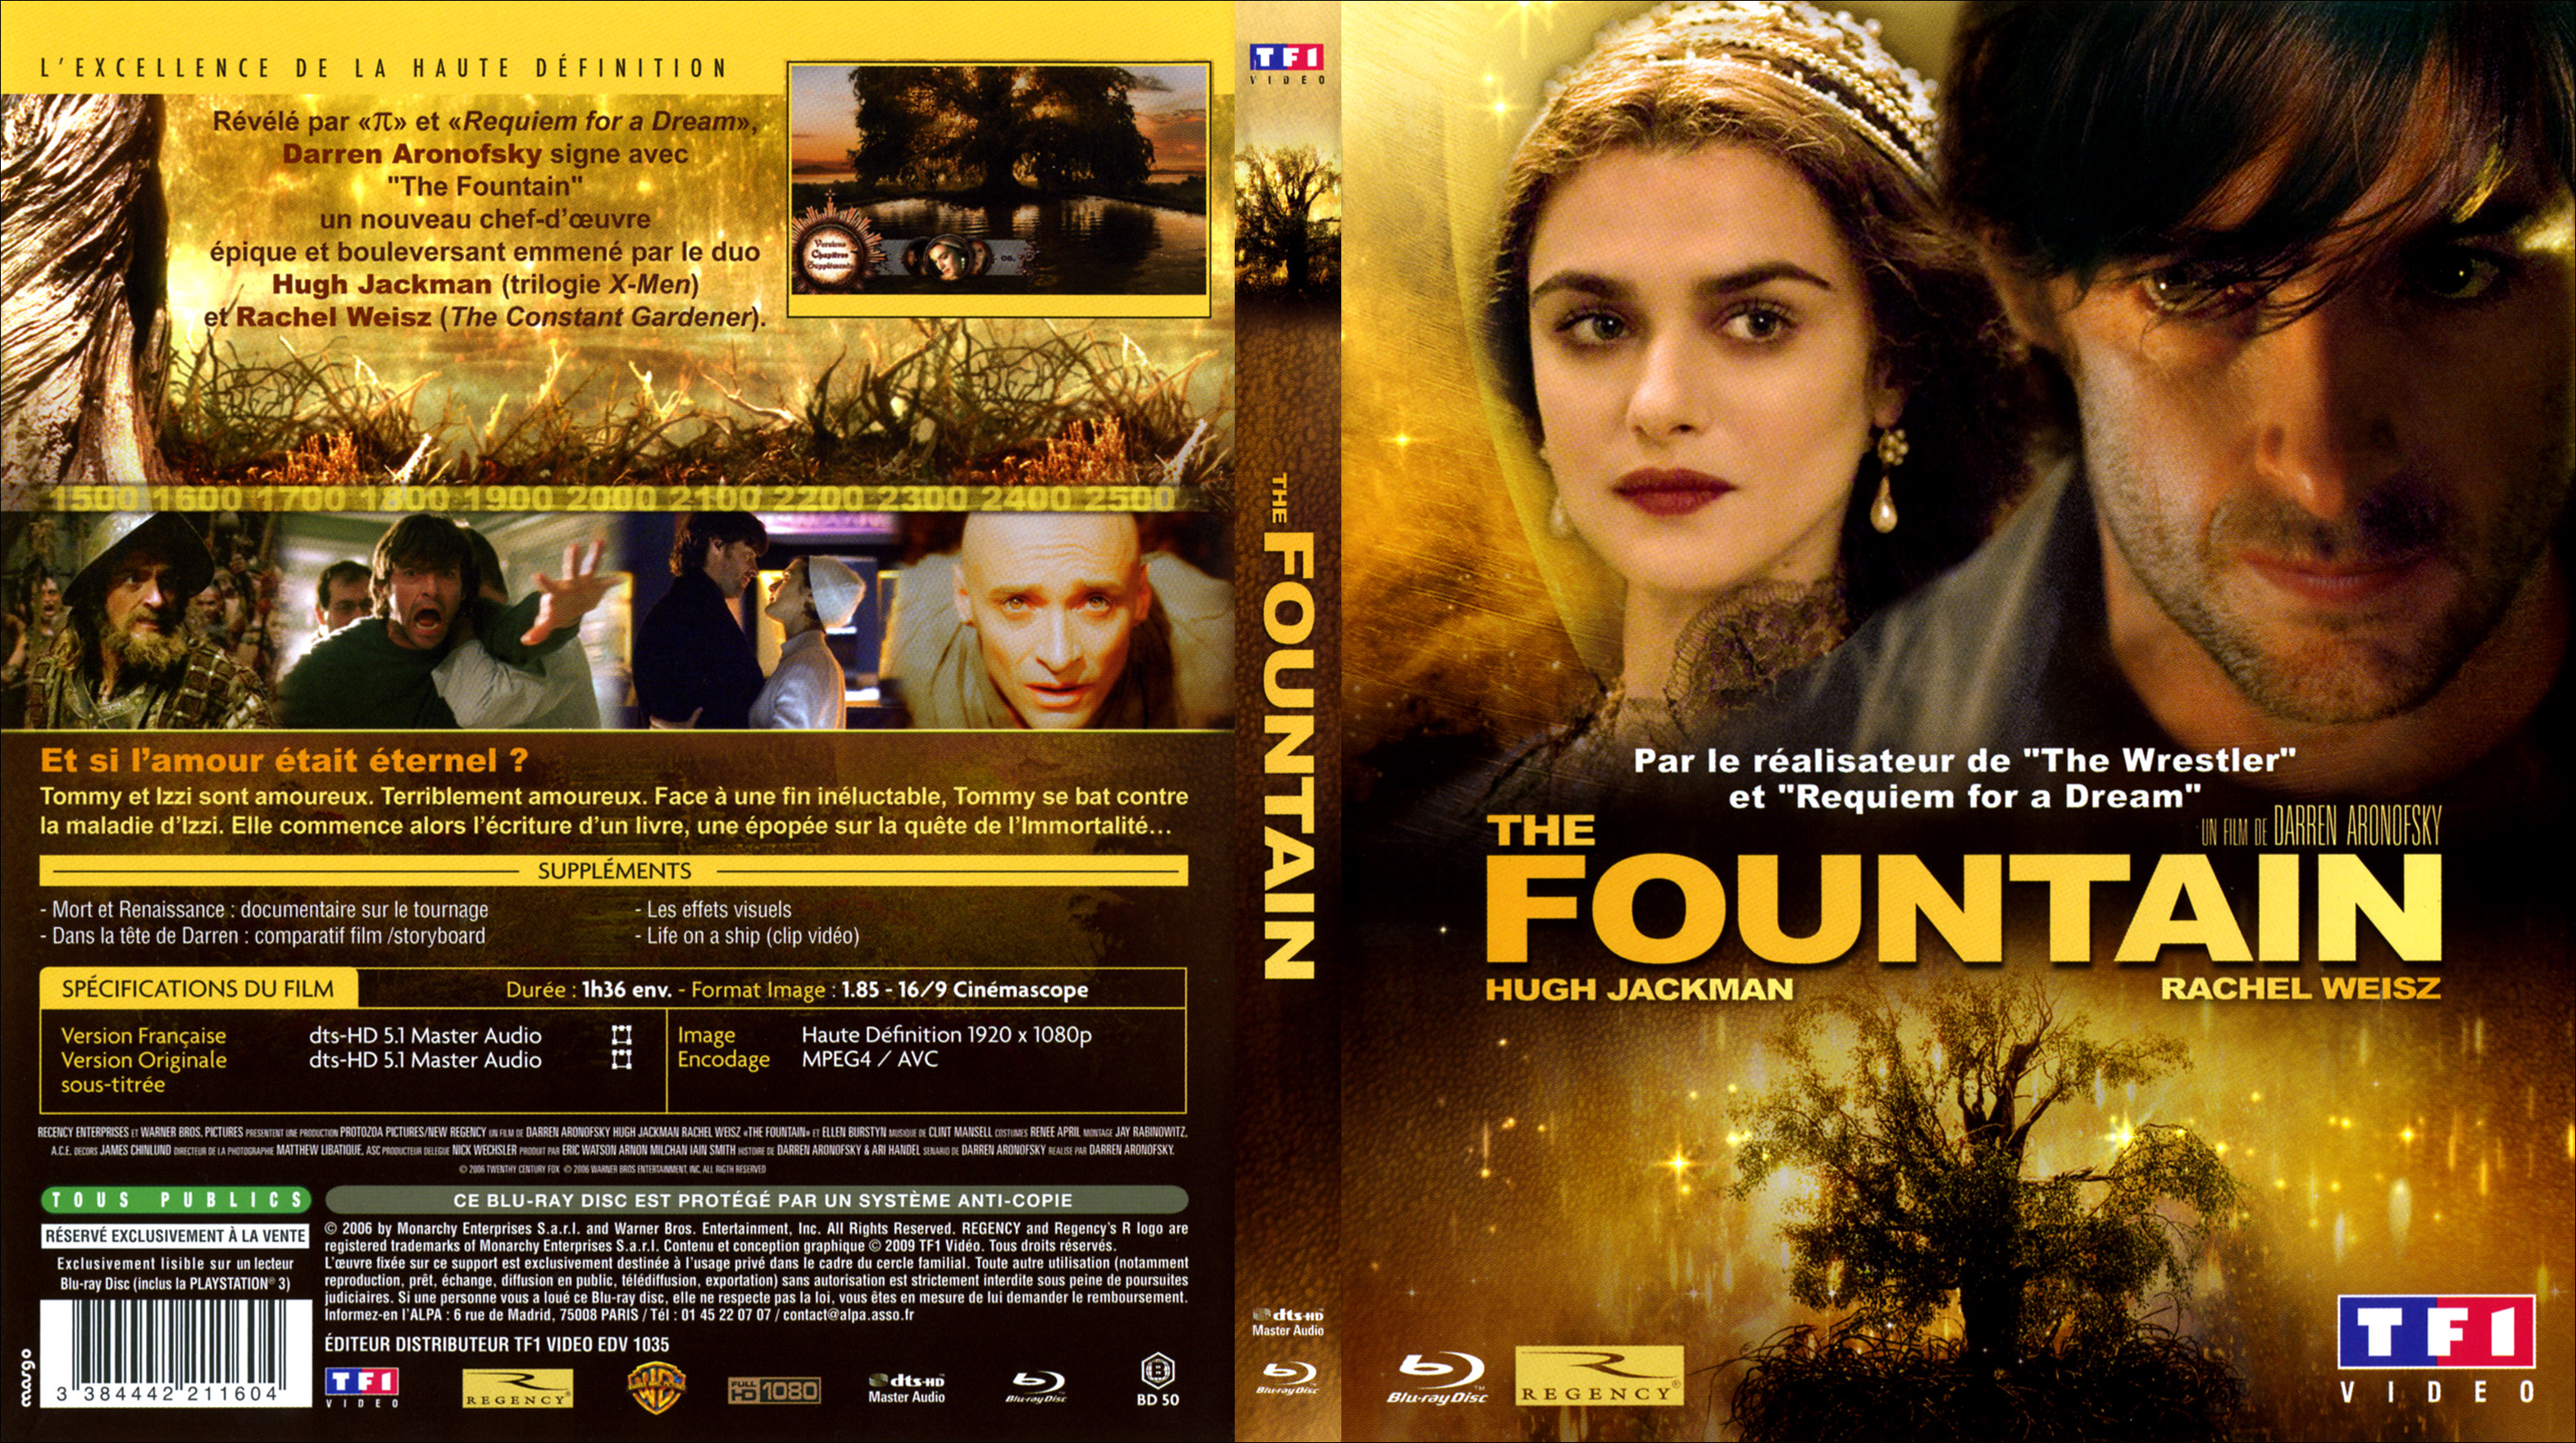 Jaquette DVD The fountain (BLU-RAY) v2